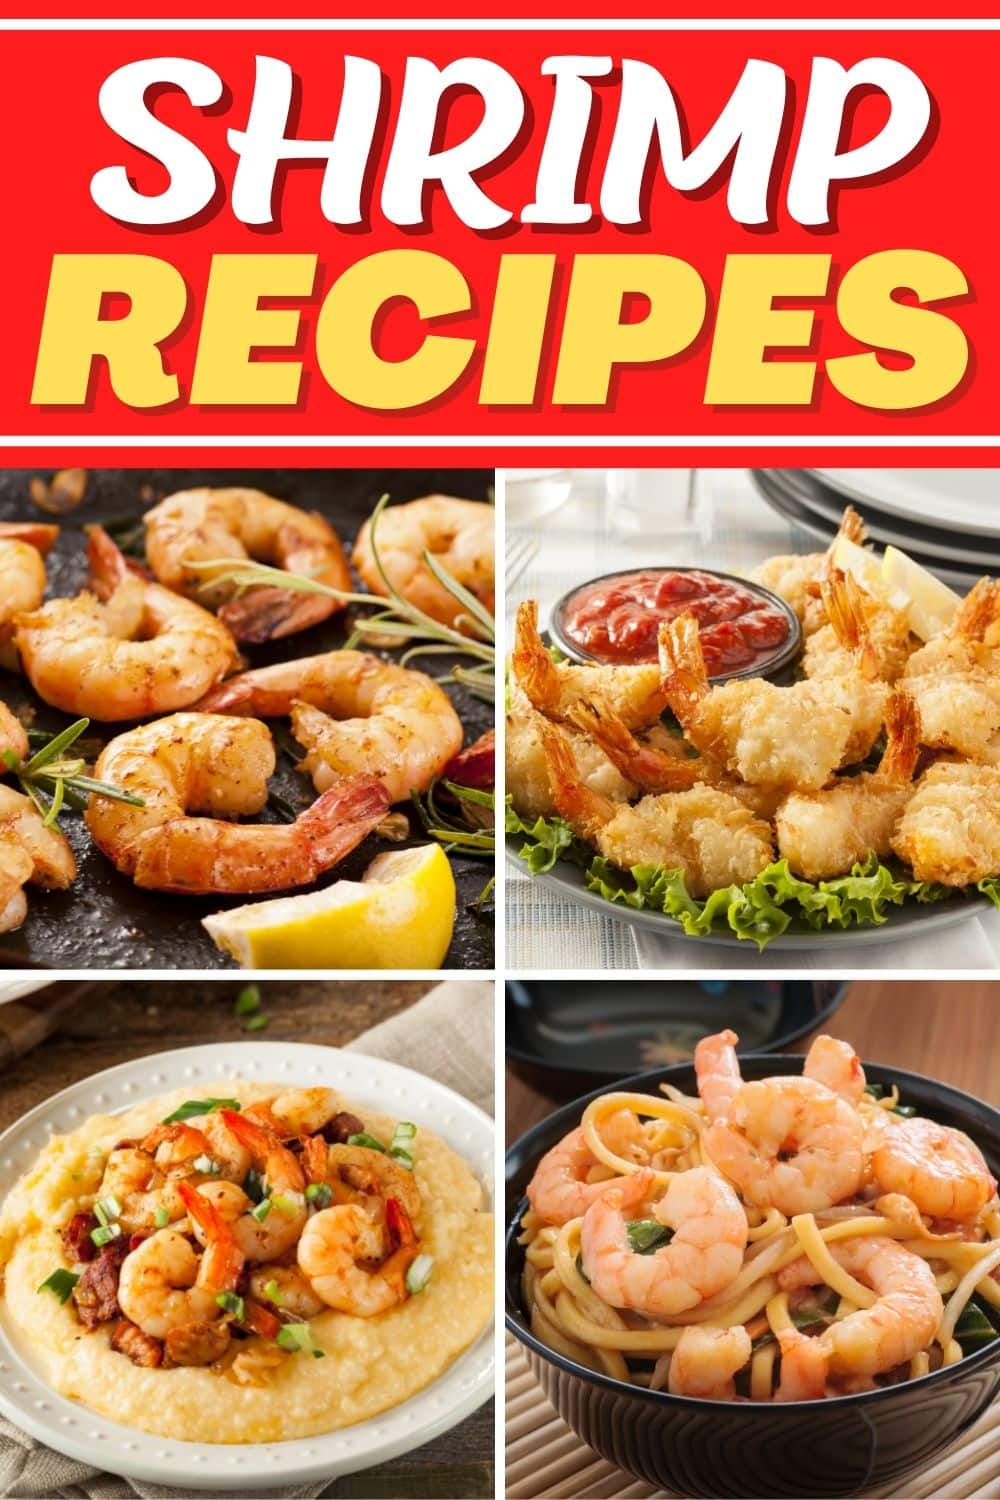 10 Of Our All Time Best Shrimp Recipes - www.vrogue.co